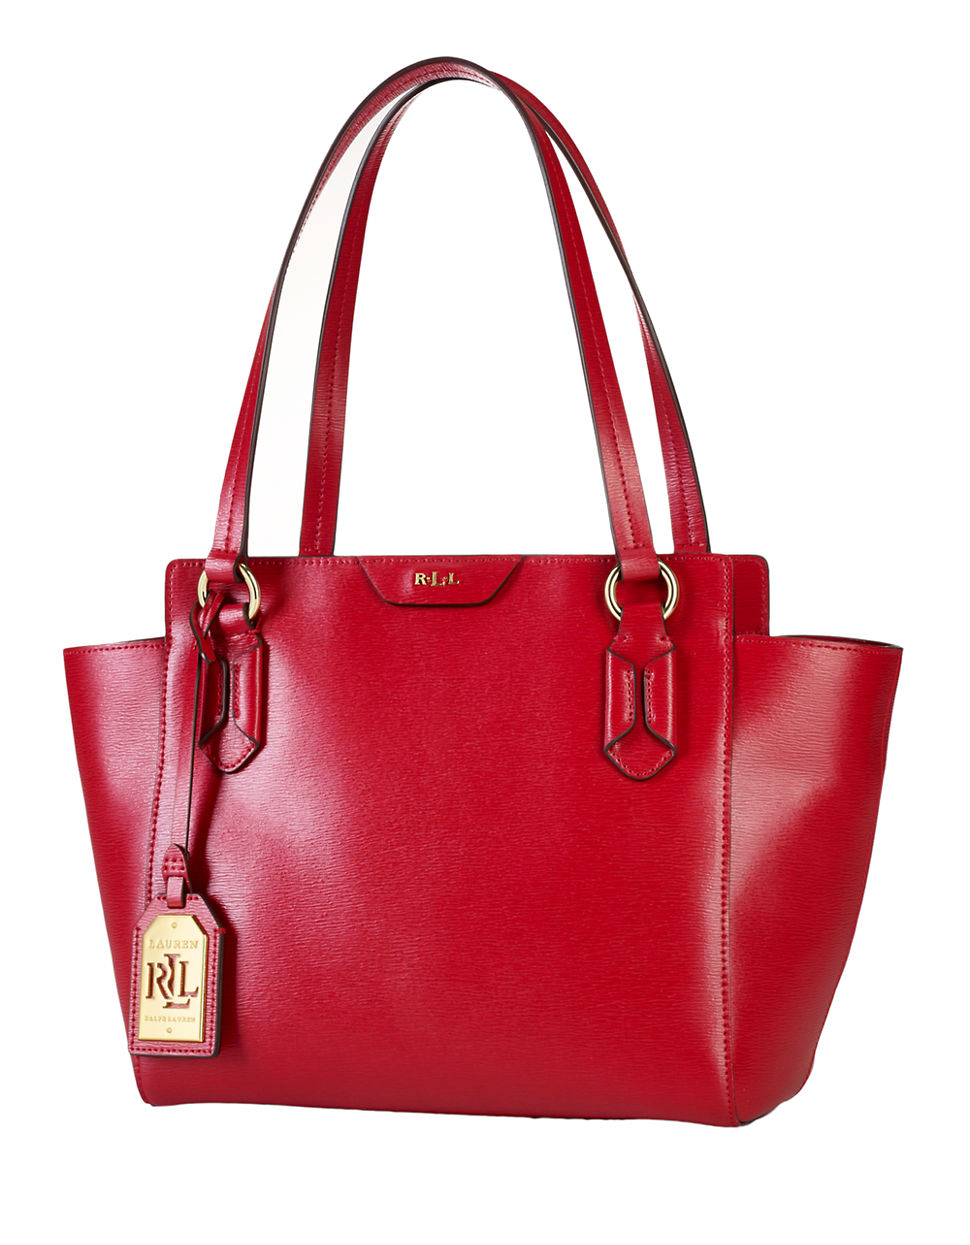 Lauren By Ralph Lauren Tate Leather Modern Shopper Tote Bag in Red (Red